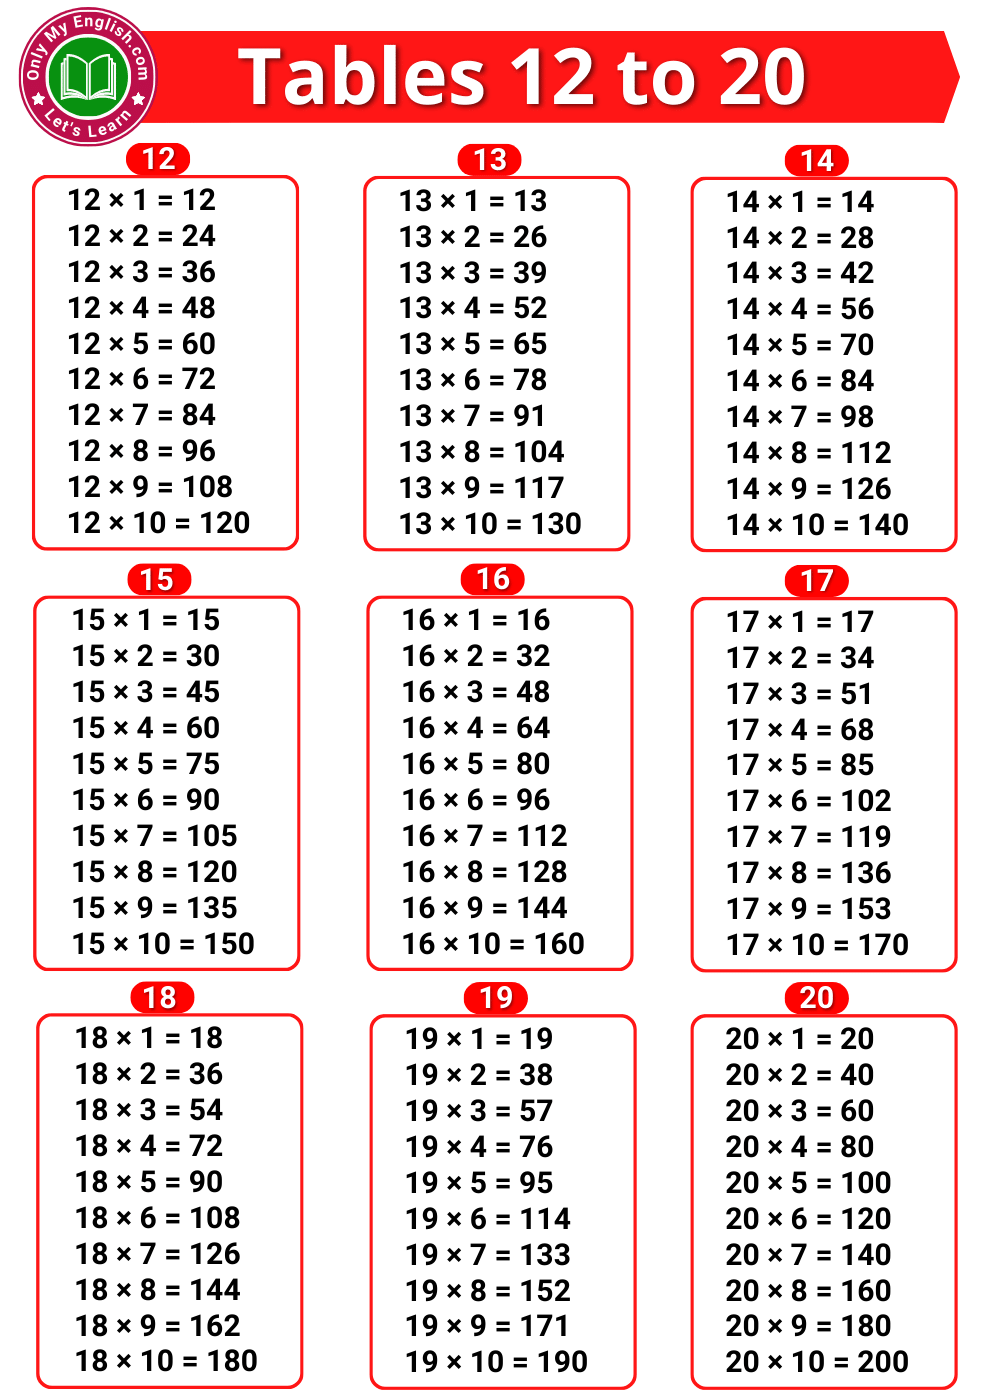 Tables 12 to 20 – Multiplication Tables 12 to 20 » Onlymyenglish.com